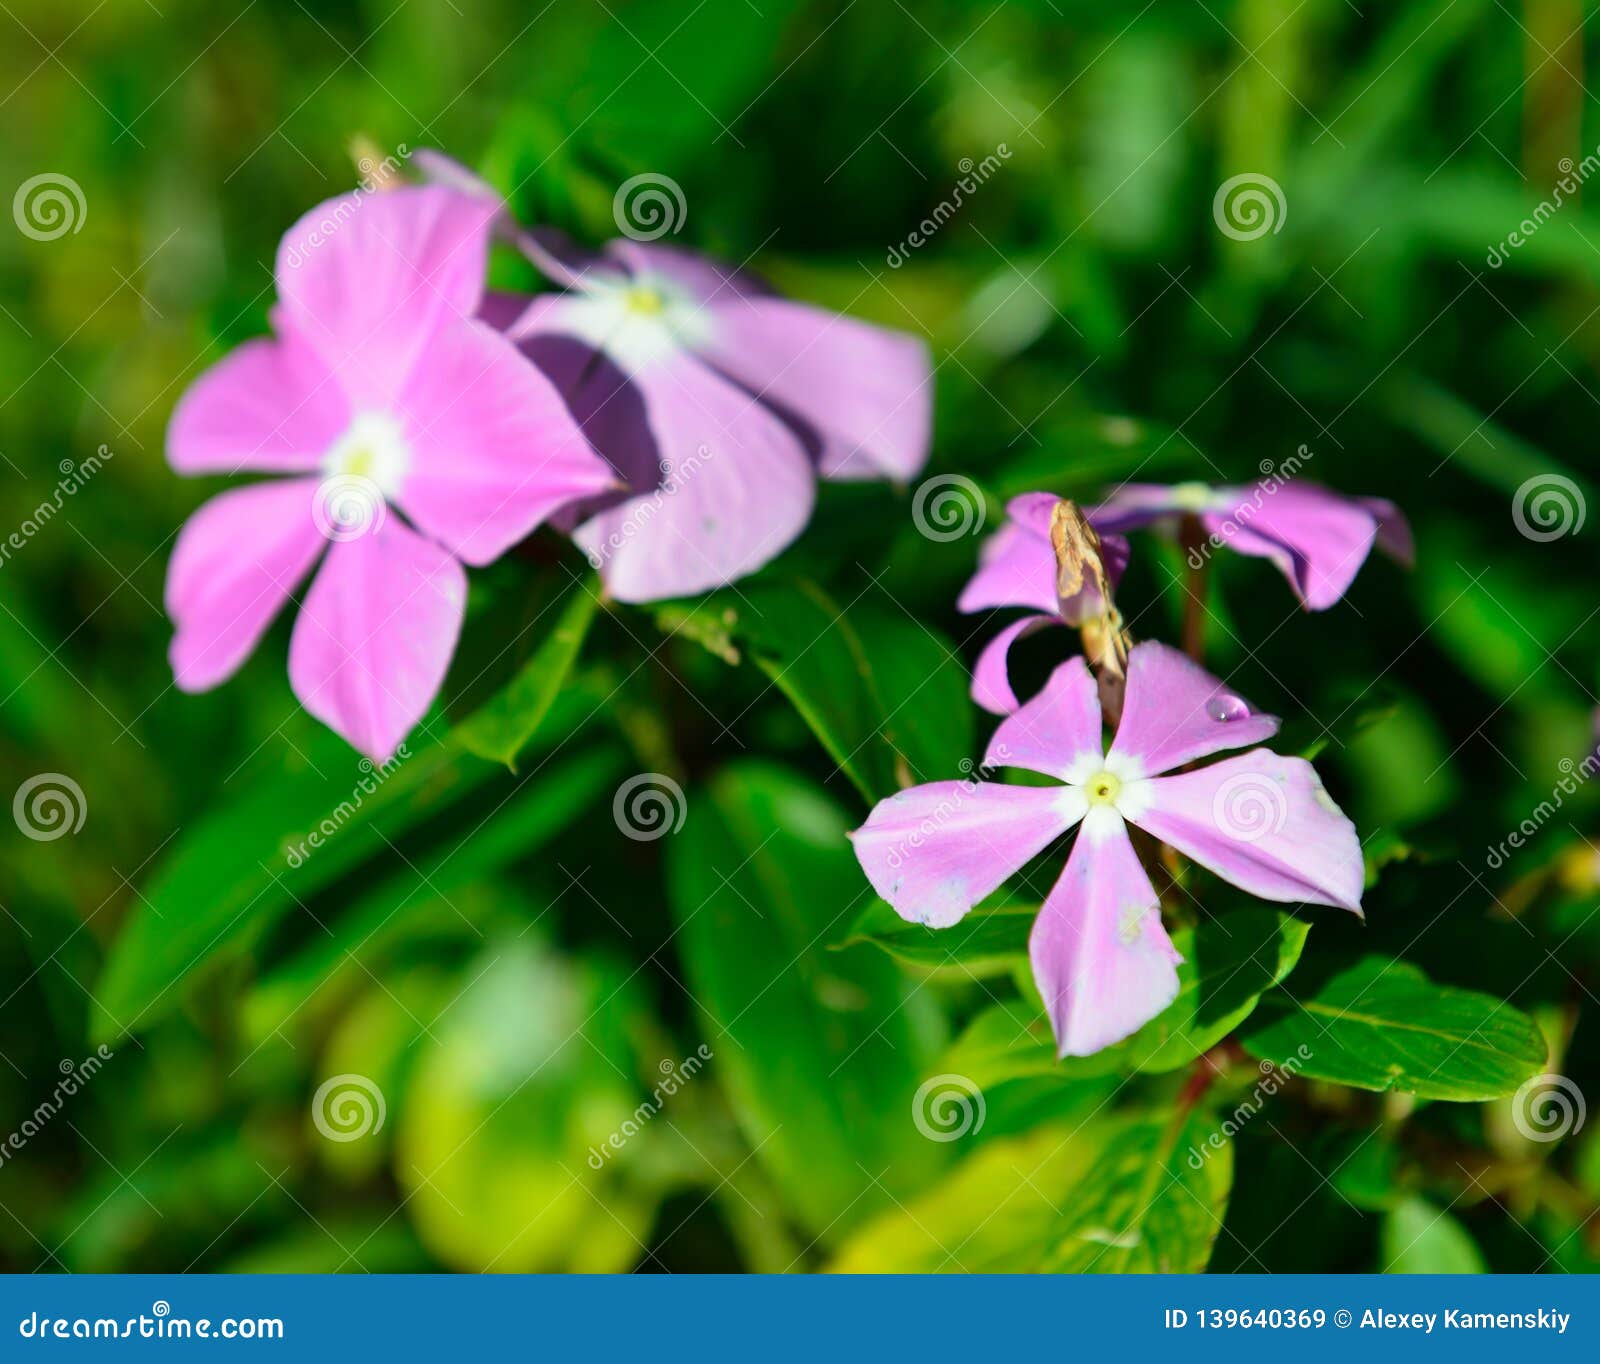 Closeup of the Pink Tropical Flowers in Hawaii Stock Image - Image of ...